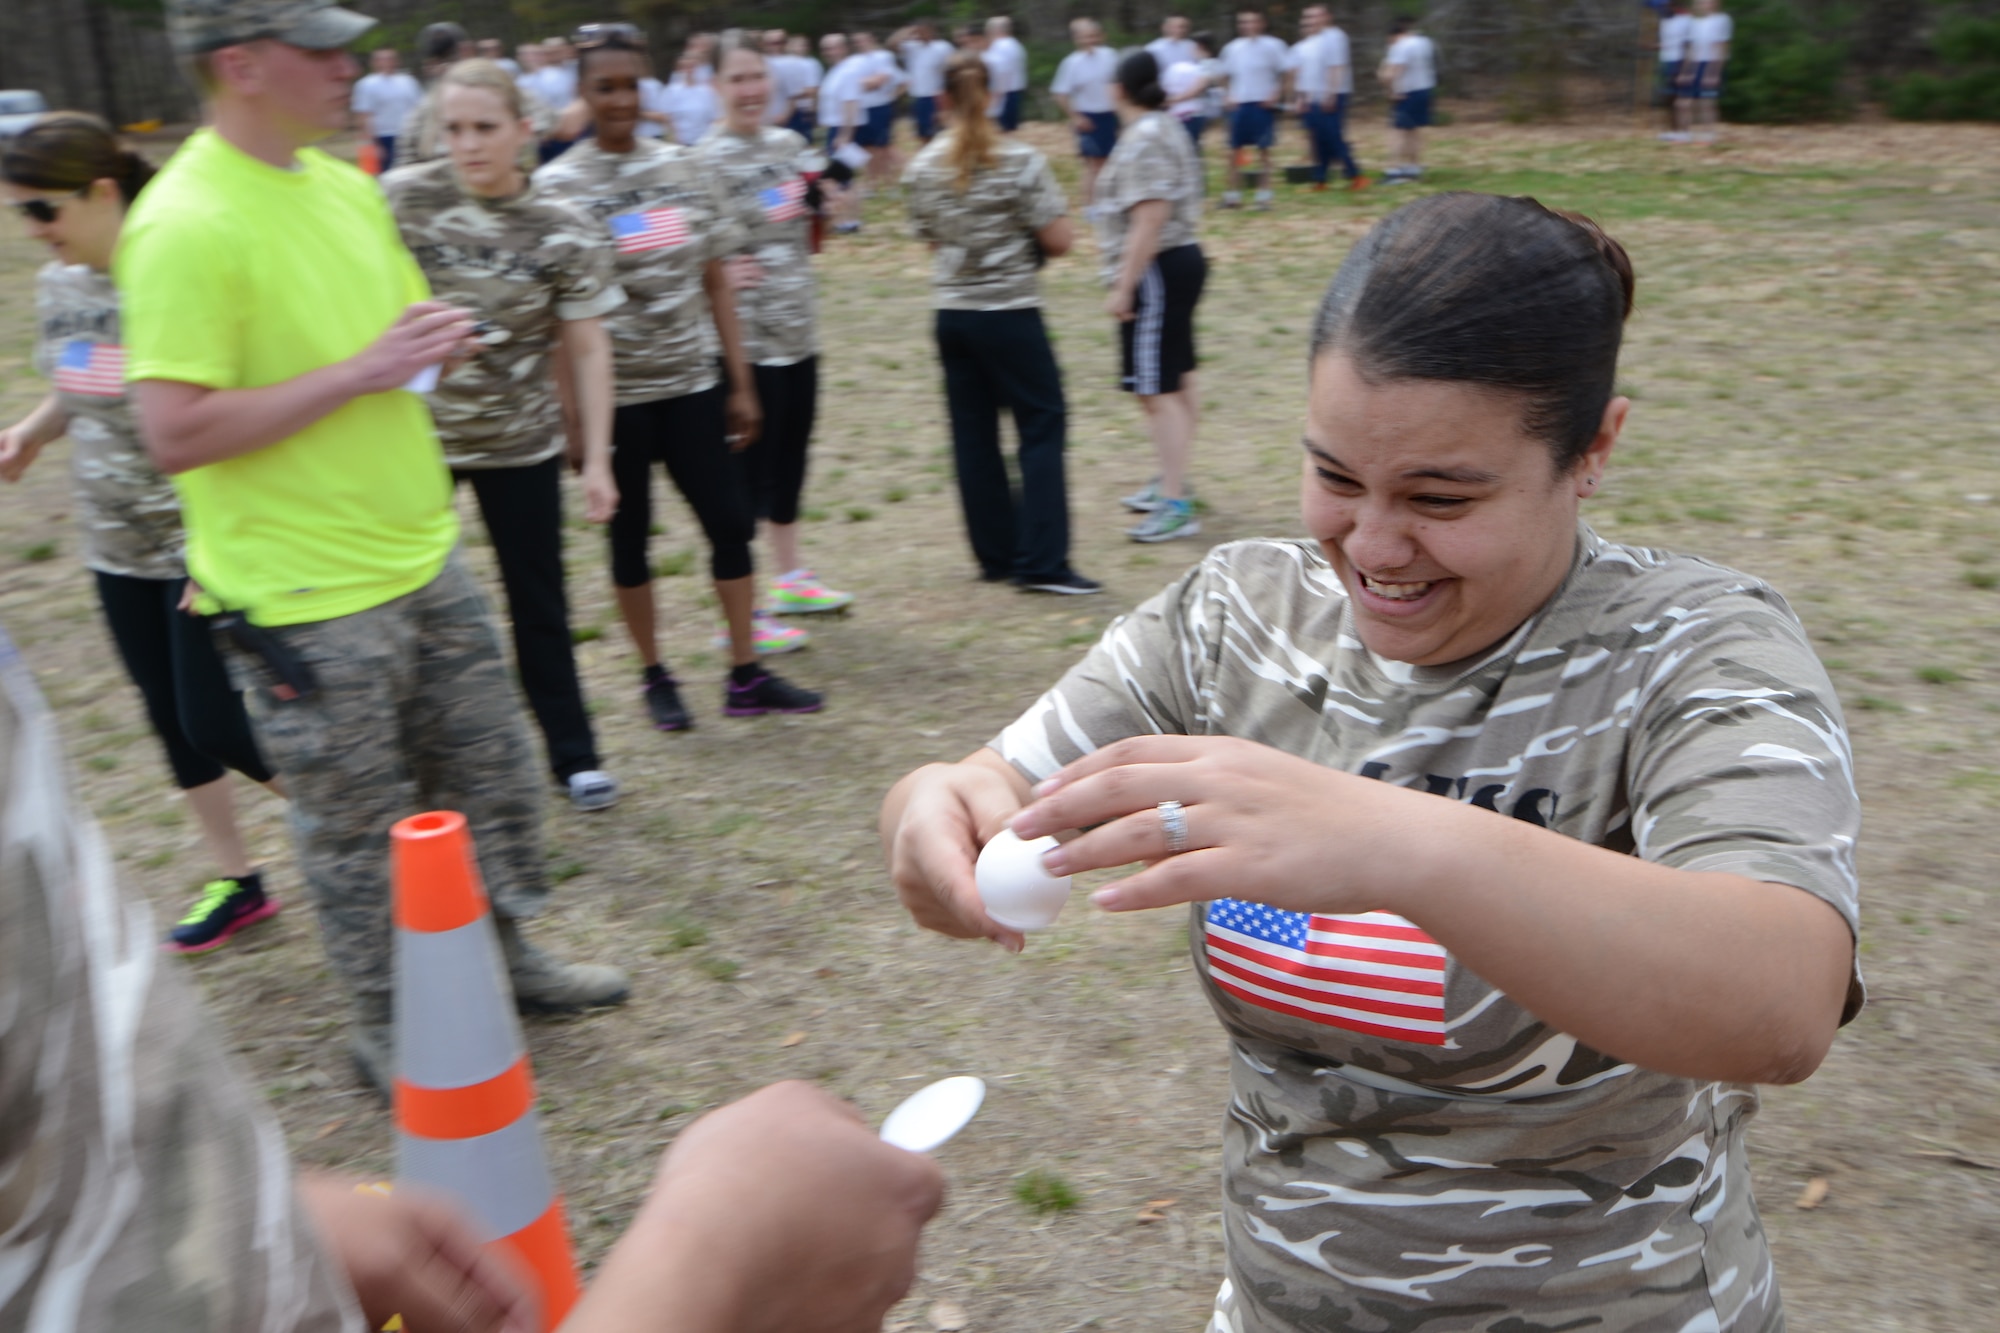 Staff Sgt. Selva Cabrera with the 103rd Force Support Squadron carefully transfers an uncooked egg onto her teammate’s spoon during the second annual Yankee Warrior Day at Bradley Air National Guard Base, East Granby, Conn., May 3, 2014. The event included various team challenges to promote esprit de corps and physical fitness. (U.S. Air National Guard photo by Tech. Sgt. Joshua Mead)